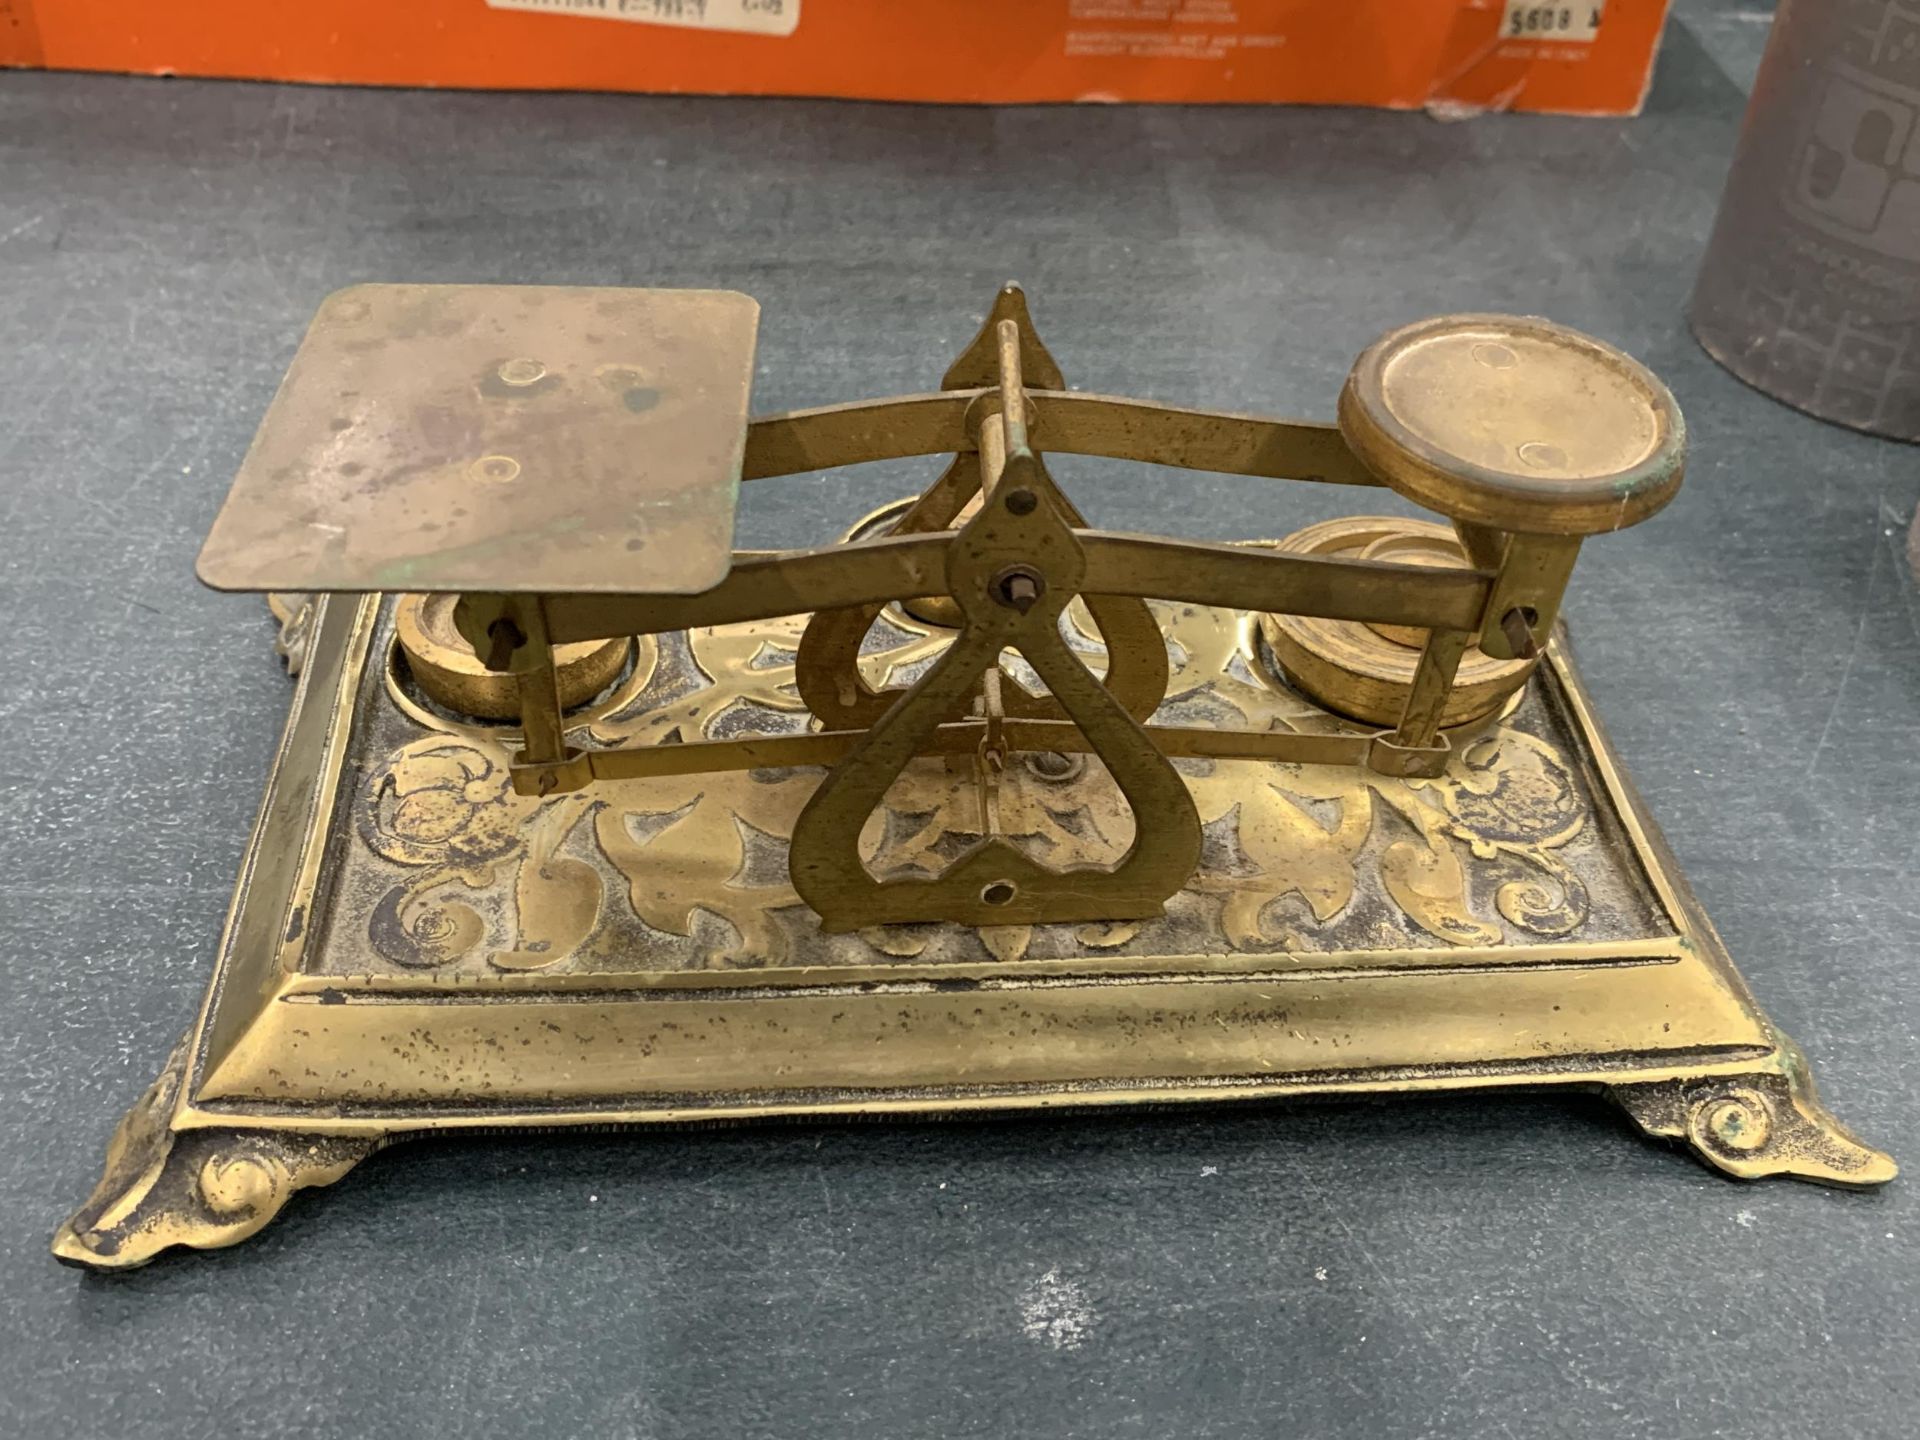 A SET OF BRASS SCALES WITH WEIGHTS - Image 2 of 3